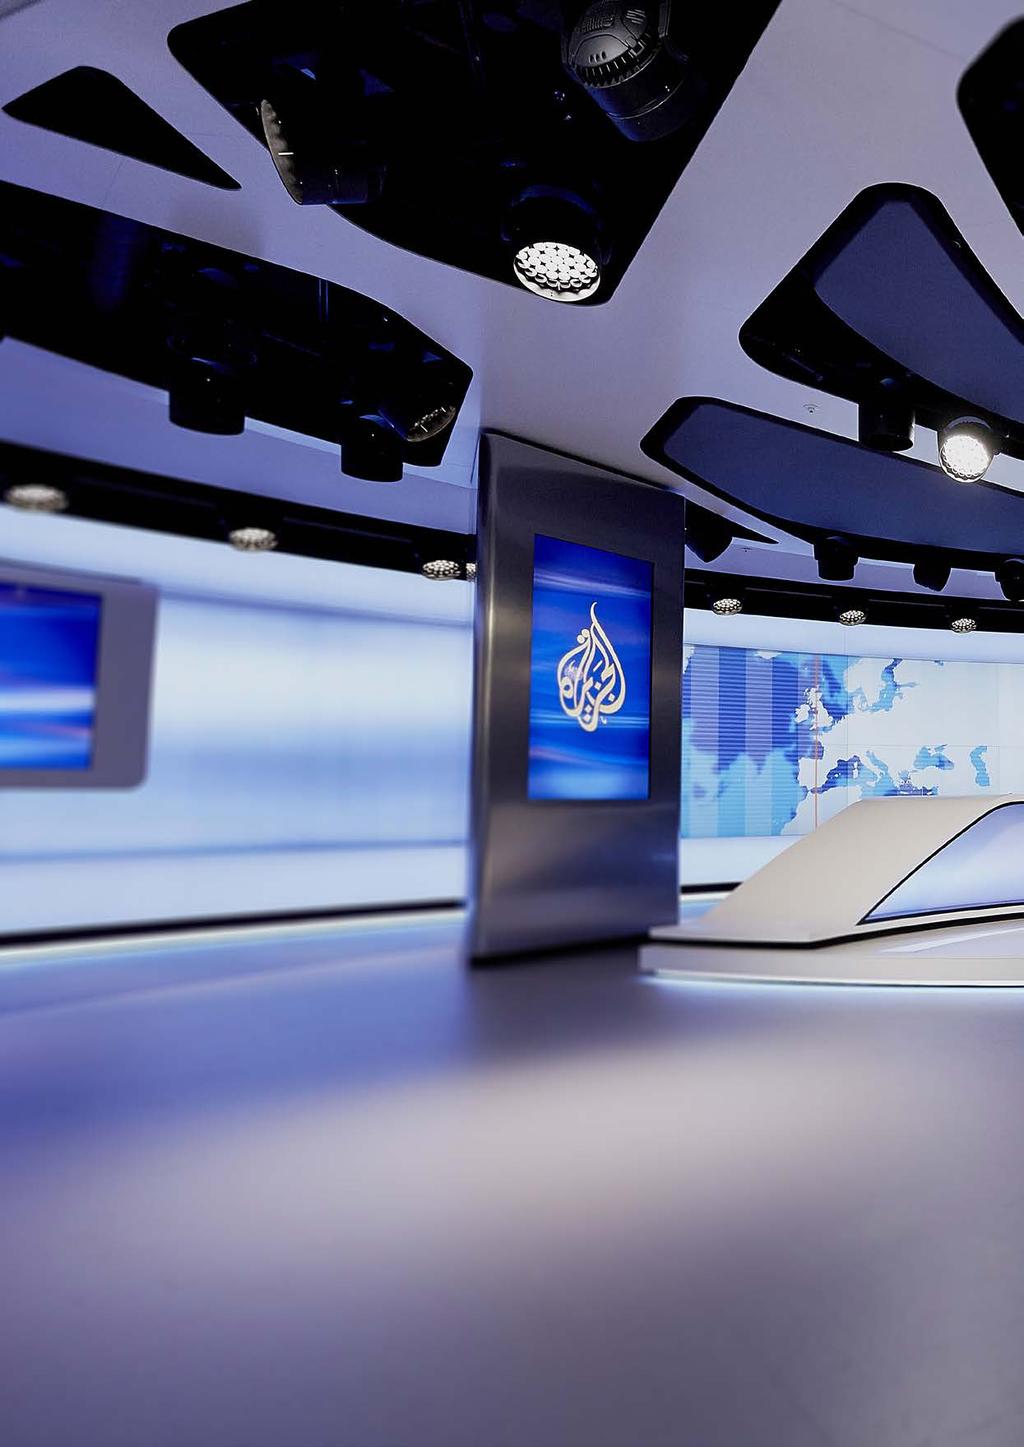 Just a few months after the opening of the studio, Veech x Veech received wide spread recognition for the project Al Jazeera News Studio and Newsroom : Silver award from the International Design